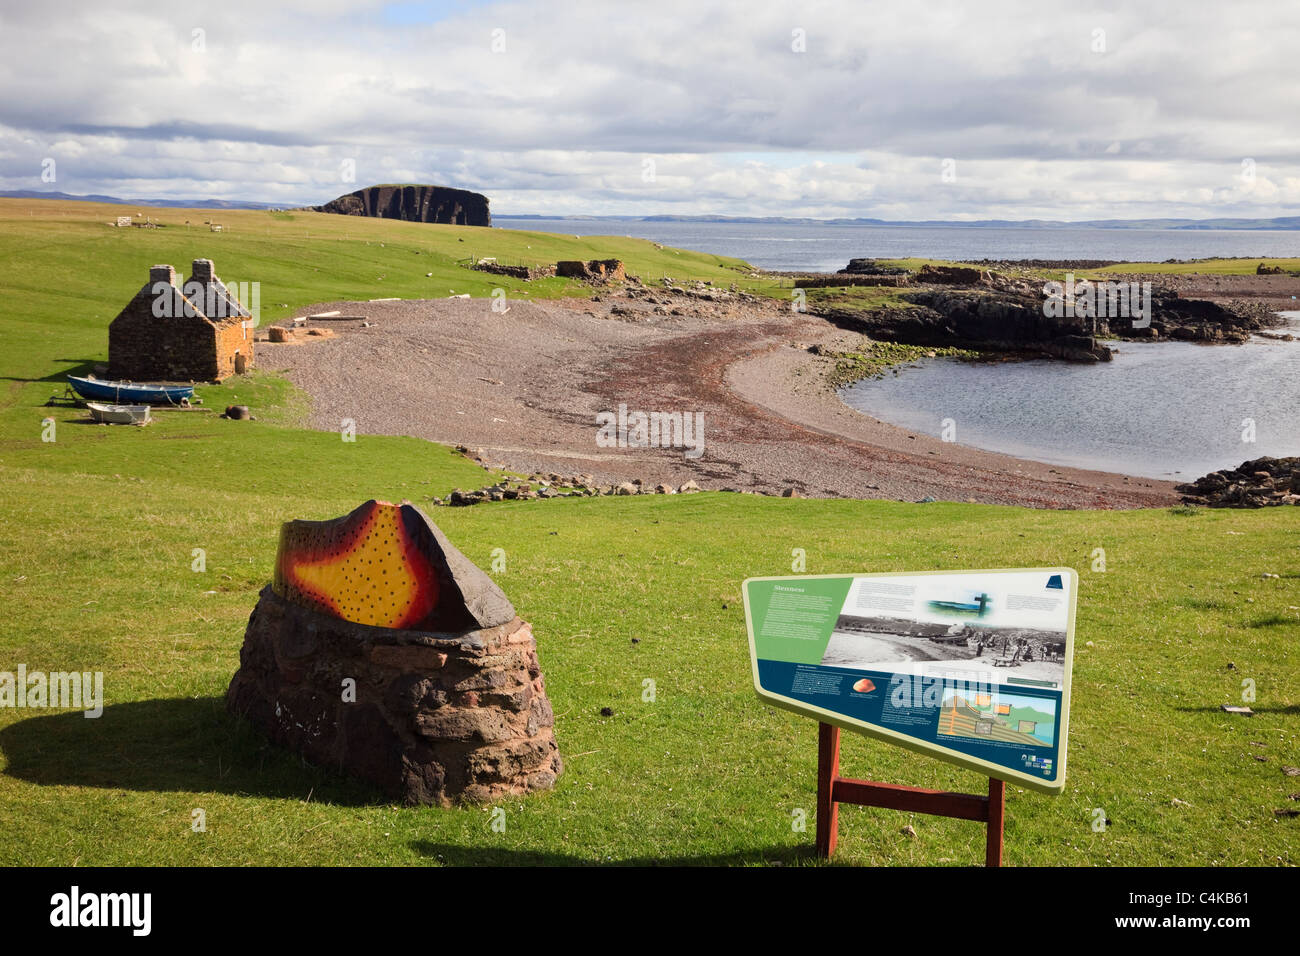 Tourist information board at old Haaf station with derelict fishing lodges around beach. Stenness, Eshaness, Shetland Islands, Scotland, UK. Stock Photo